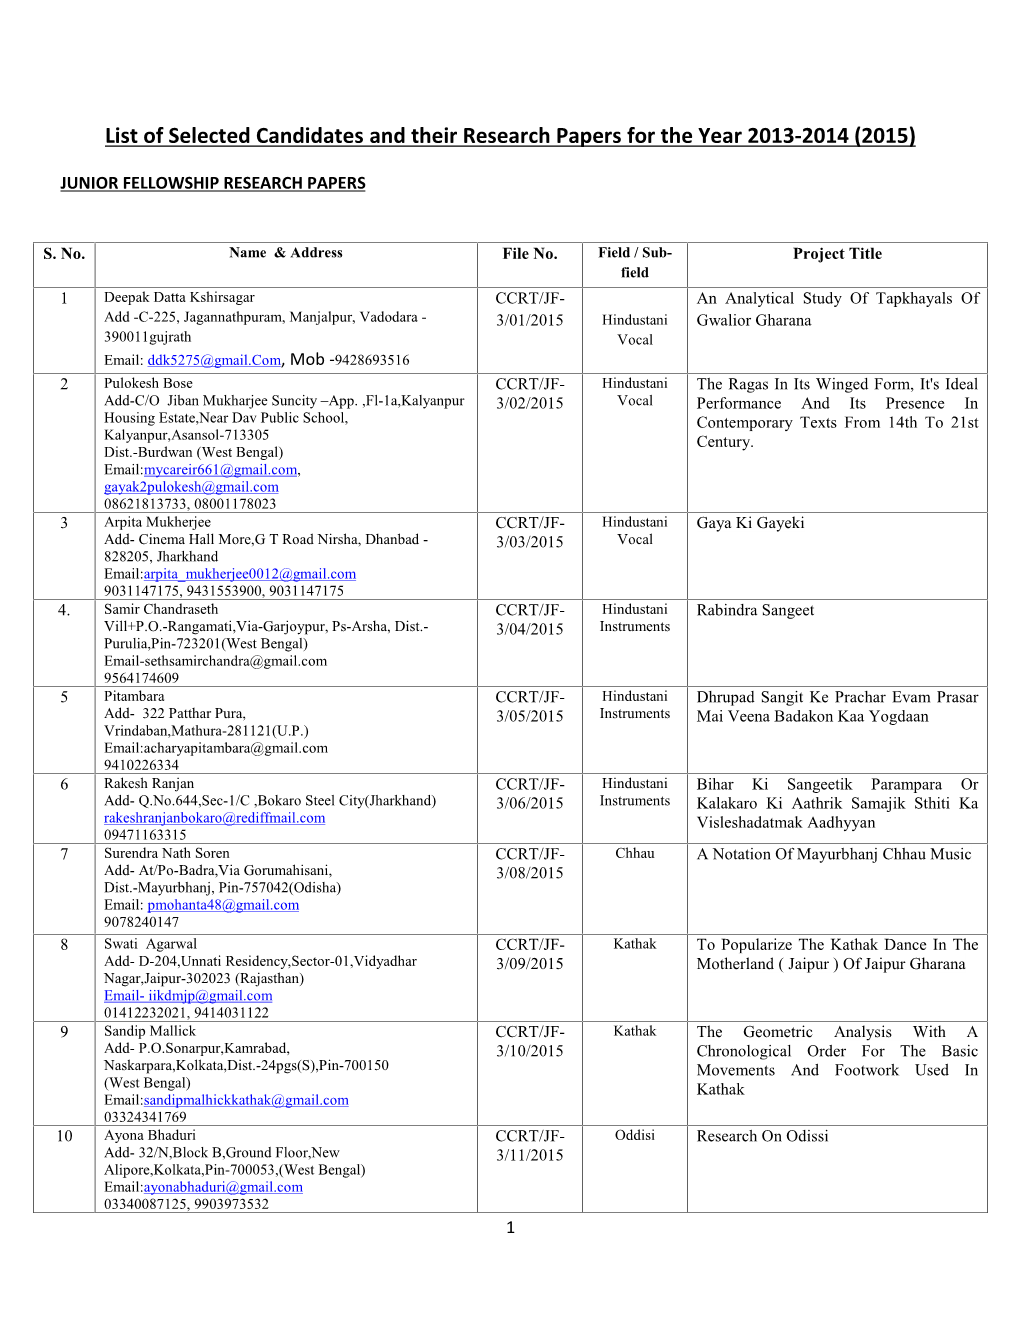 List of Selected Candidates and Their Research Papers for the Year 2013-2014 (2015)